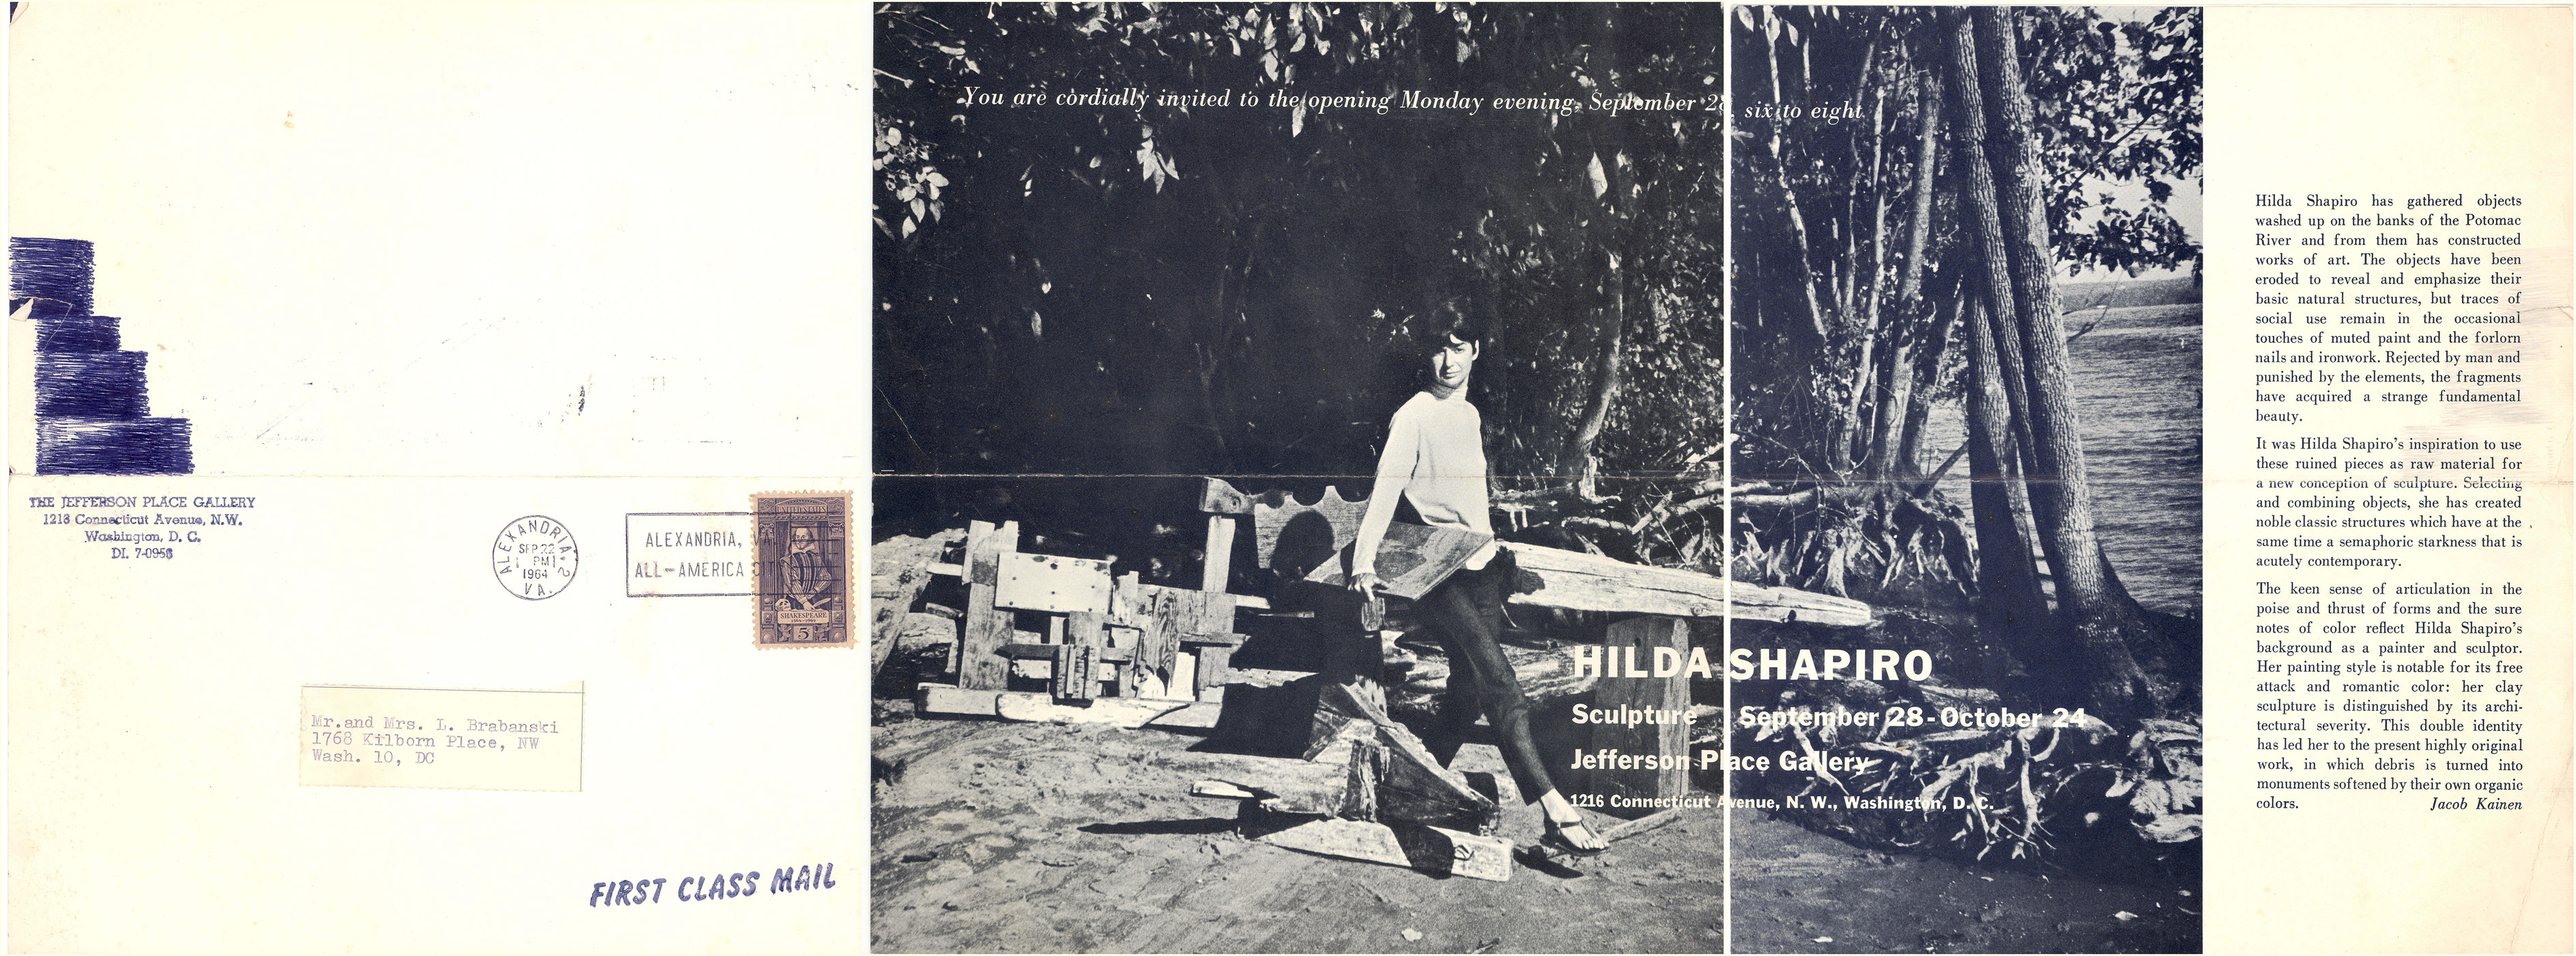 Announcement card for Hilda Shapiro at Jefferson Place Gallery, 1961